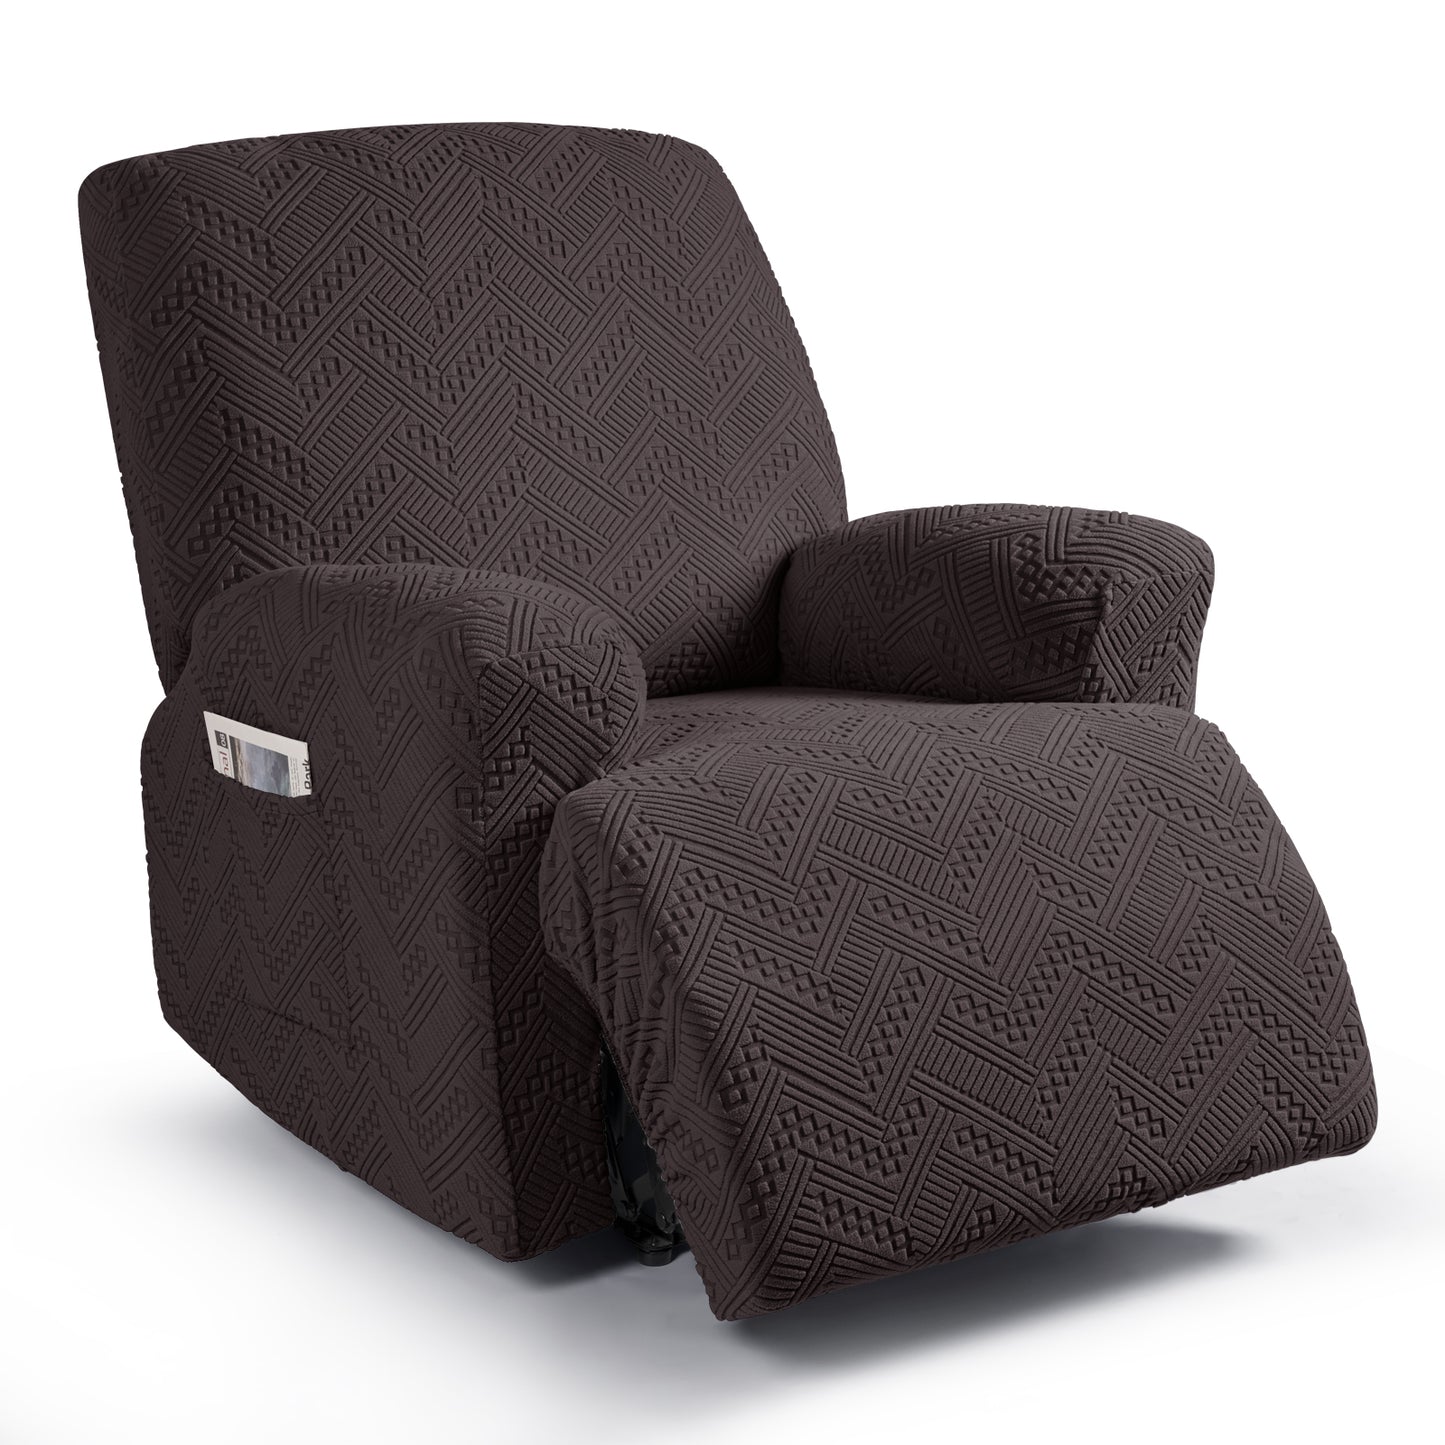 1 seat recliner chair slipcover